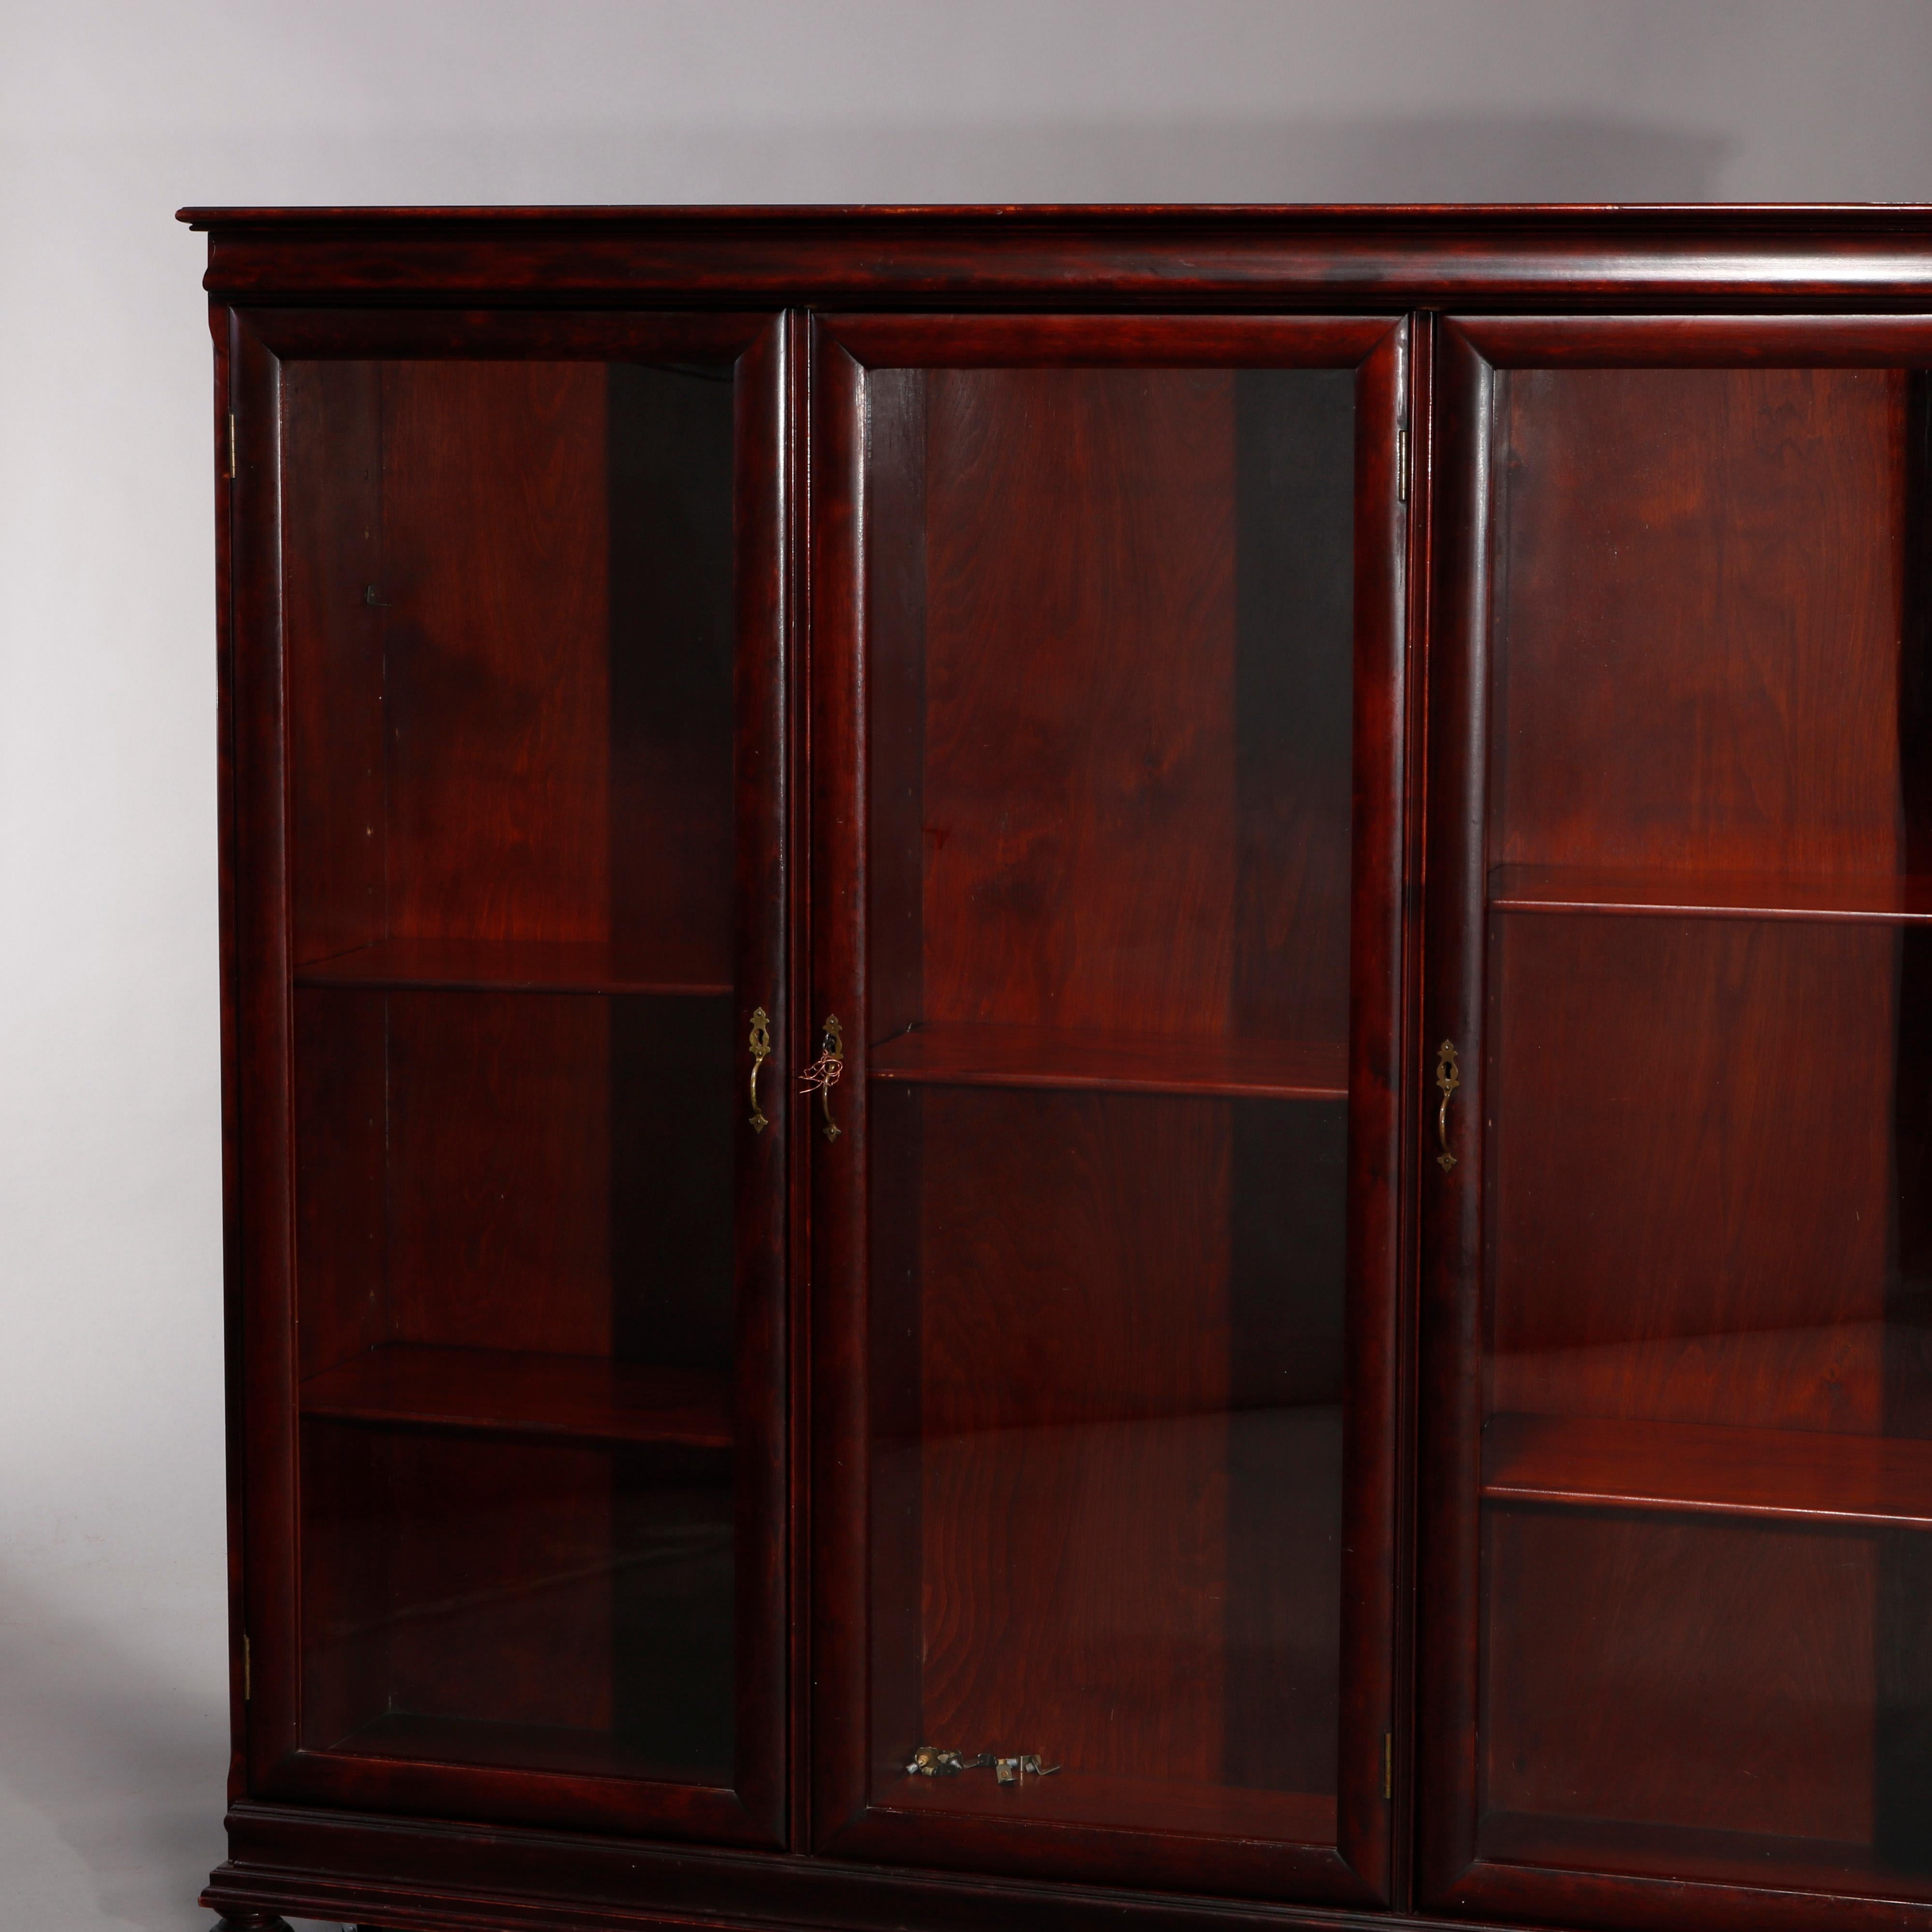 An antique American empire triple bookcase offers flame mahogany construction with ogee frieze surmounting case with three glass doors opening to divided and shelved interiors, raised on bun feet and having cast bronze hardware, locking and with